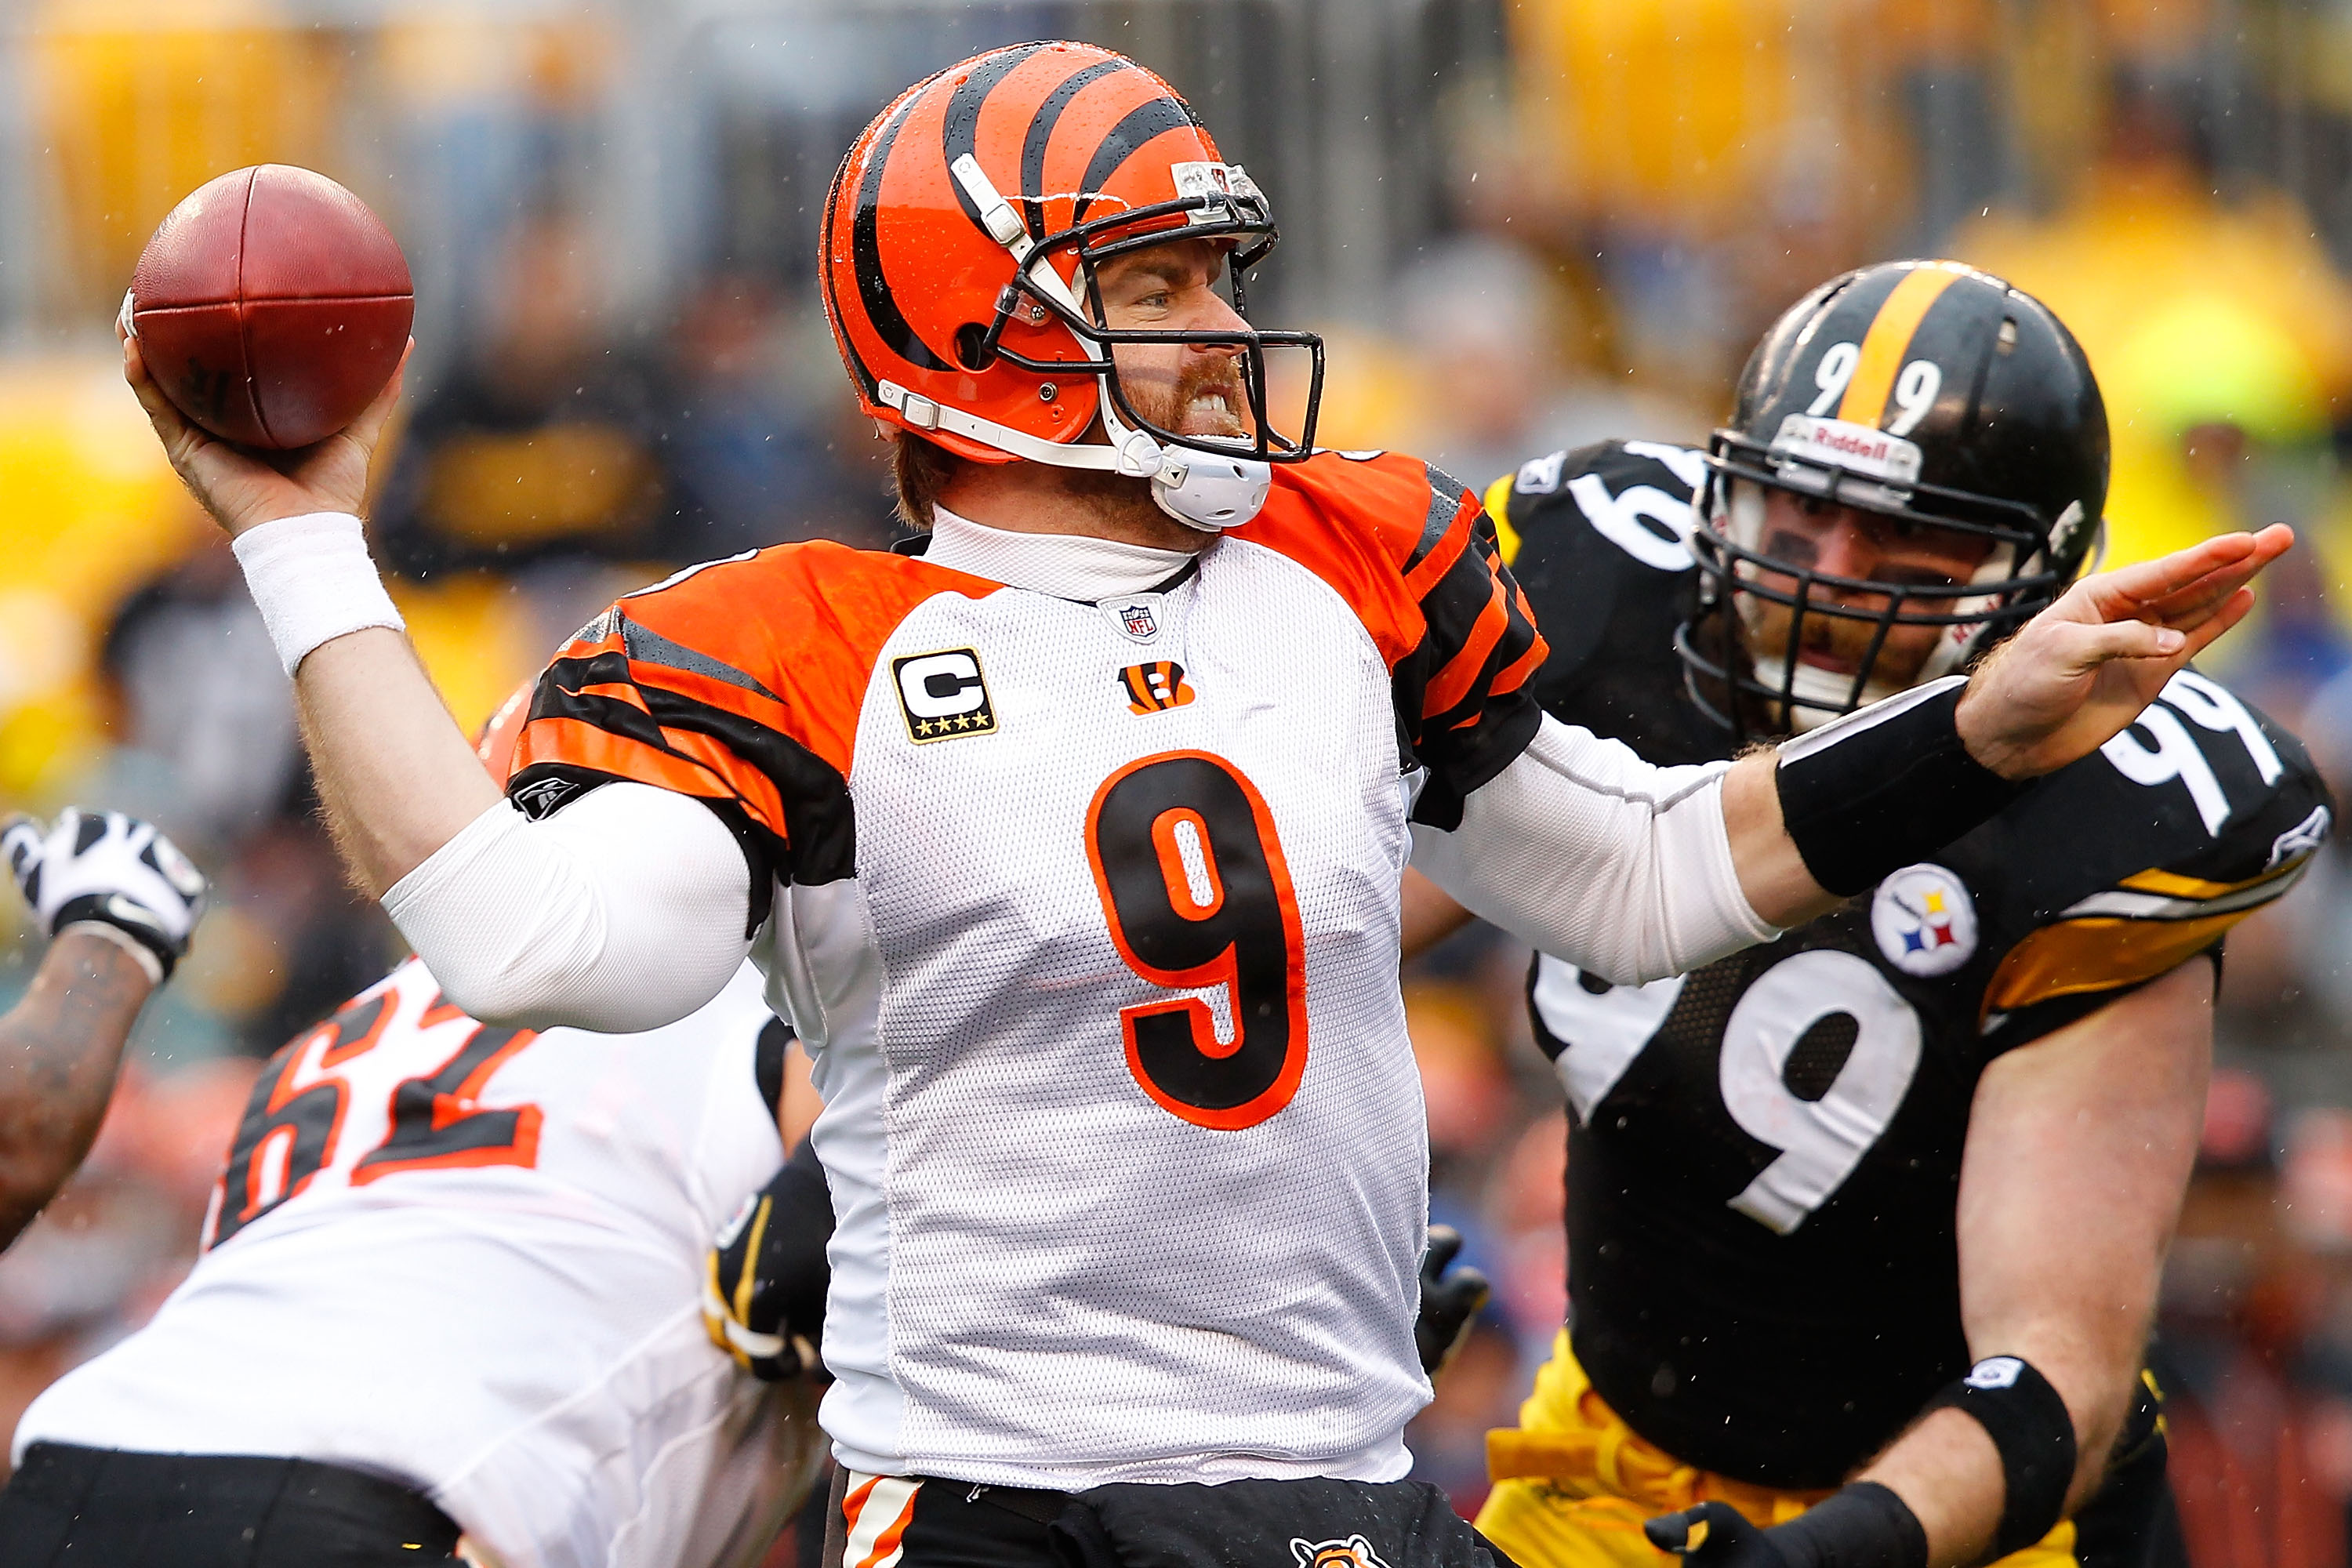 PITTSBURGH - DECEMBER 12: Carson Palmer #9 of the Cincinnati Bengals drops back to pass against the Pittsburgh Steelers during the game on December 12, 2010 at Heinz Field in Pittsburgh, Pennsylvania.  (Photo by Jared Wickerham/Getty Images)